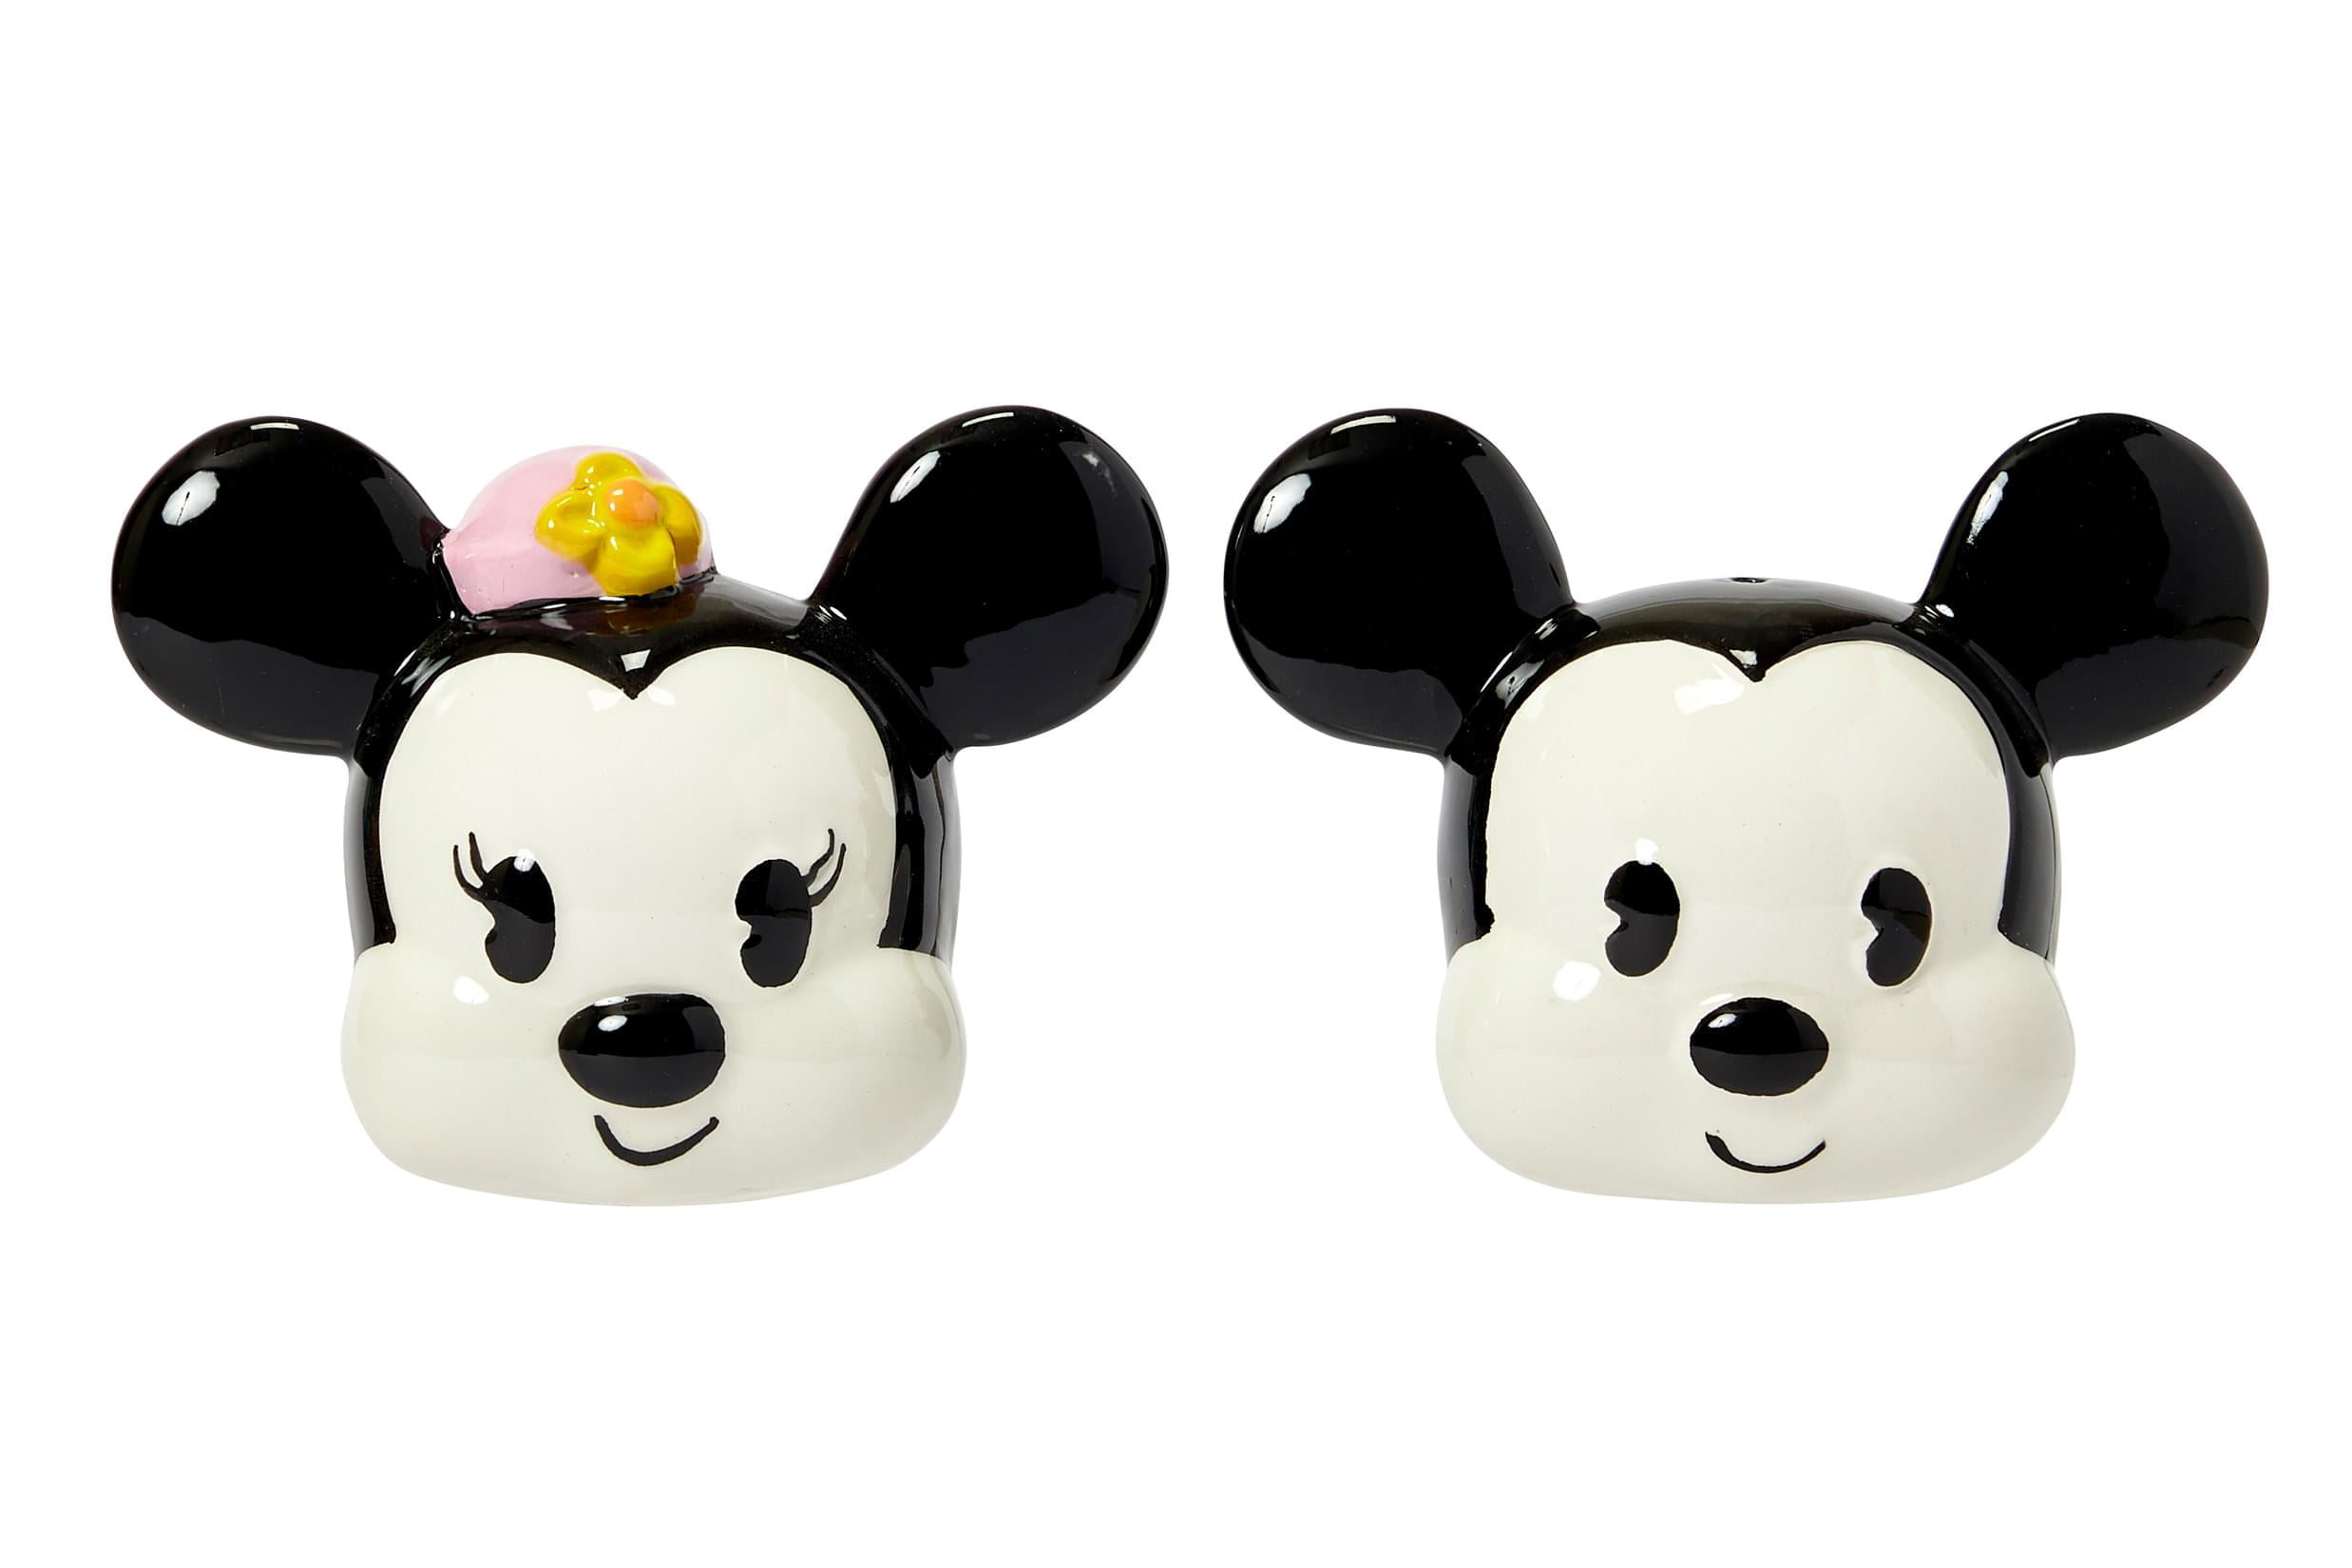 Easy to Fill Glossy Finish Ceramic Minnie and Mickey Mouse Salt and Pepper Shakers Disney Salt and Pepper Shakers Set Red/Black Perfect for Any Tabletop 